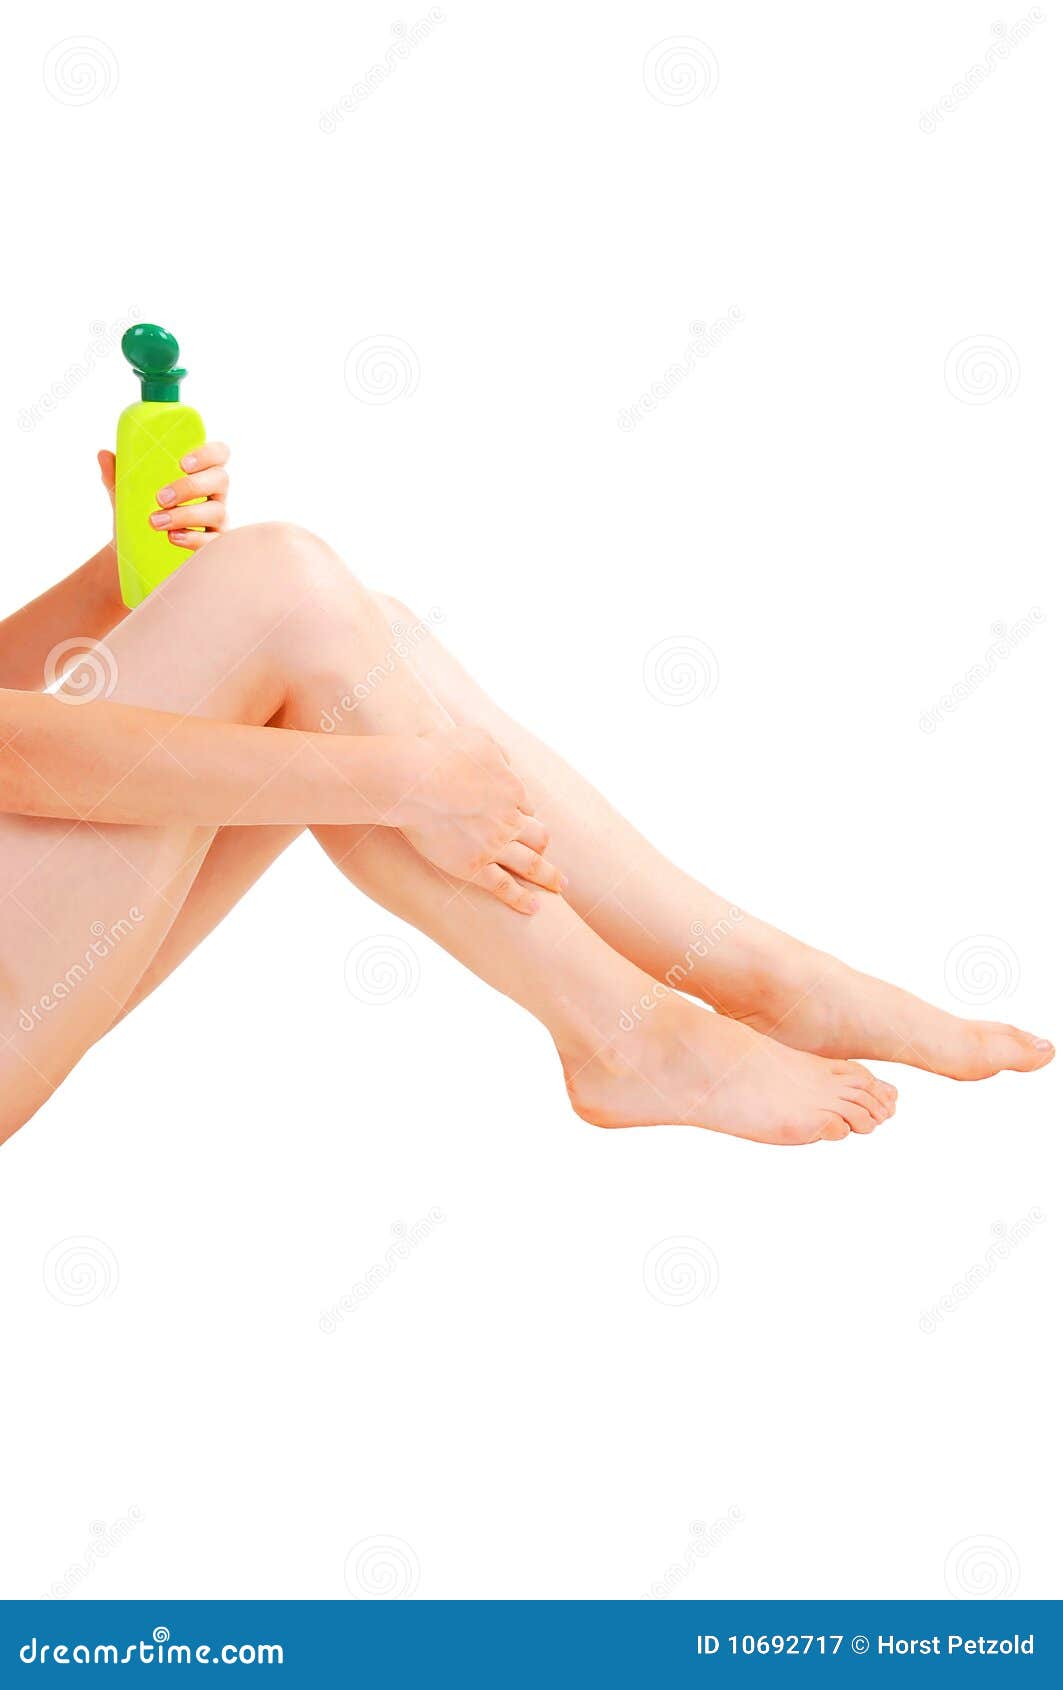 Pretty woman with a bottle between her legs Stock Photo